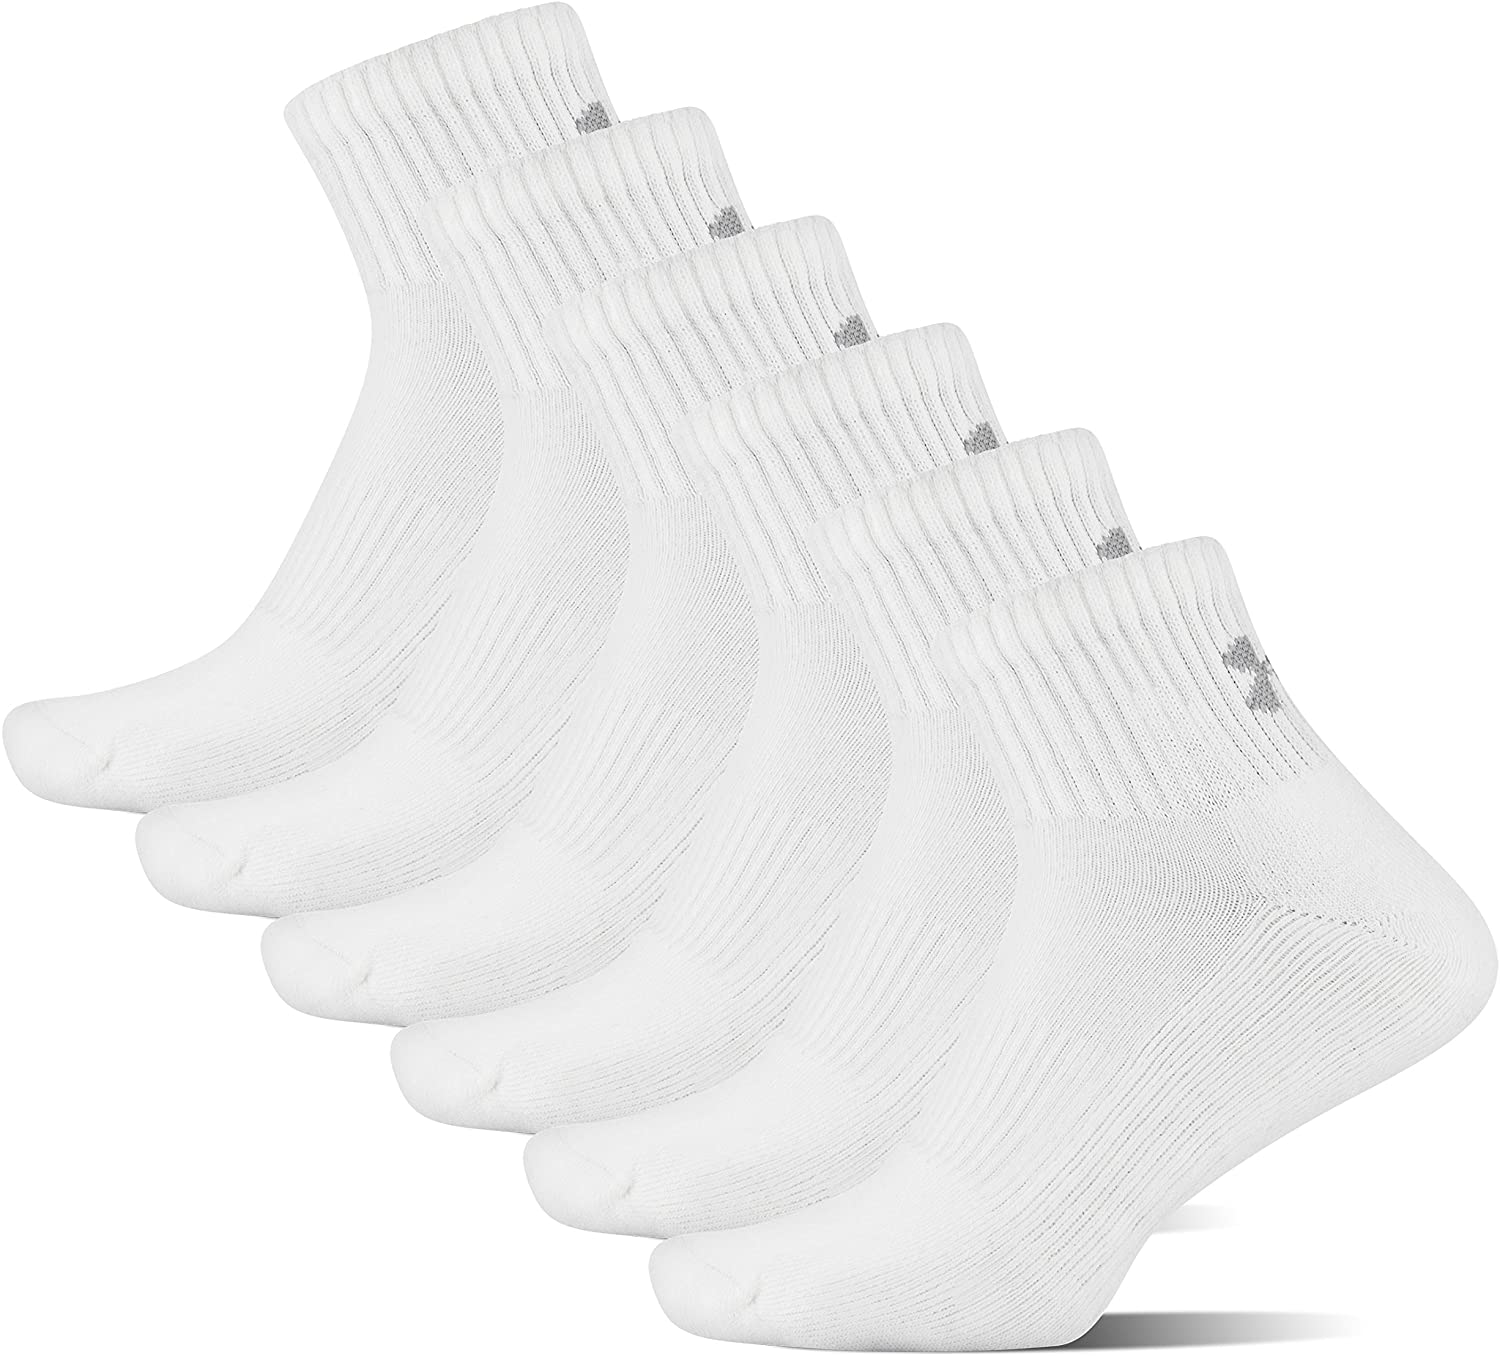 Armour Adult Charged Cotton 2.0 Socks, 6-Pairs | eBay